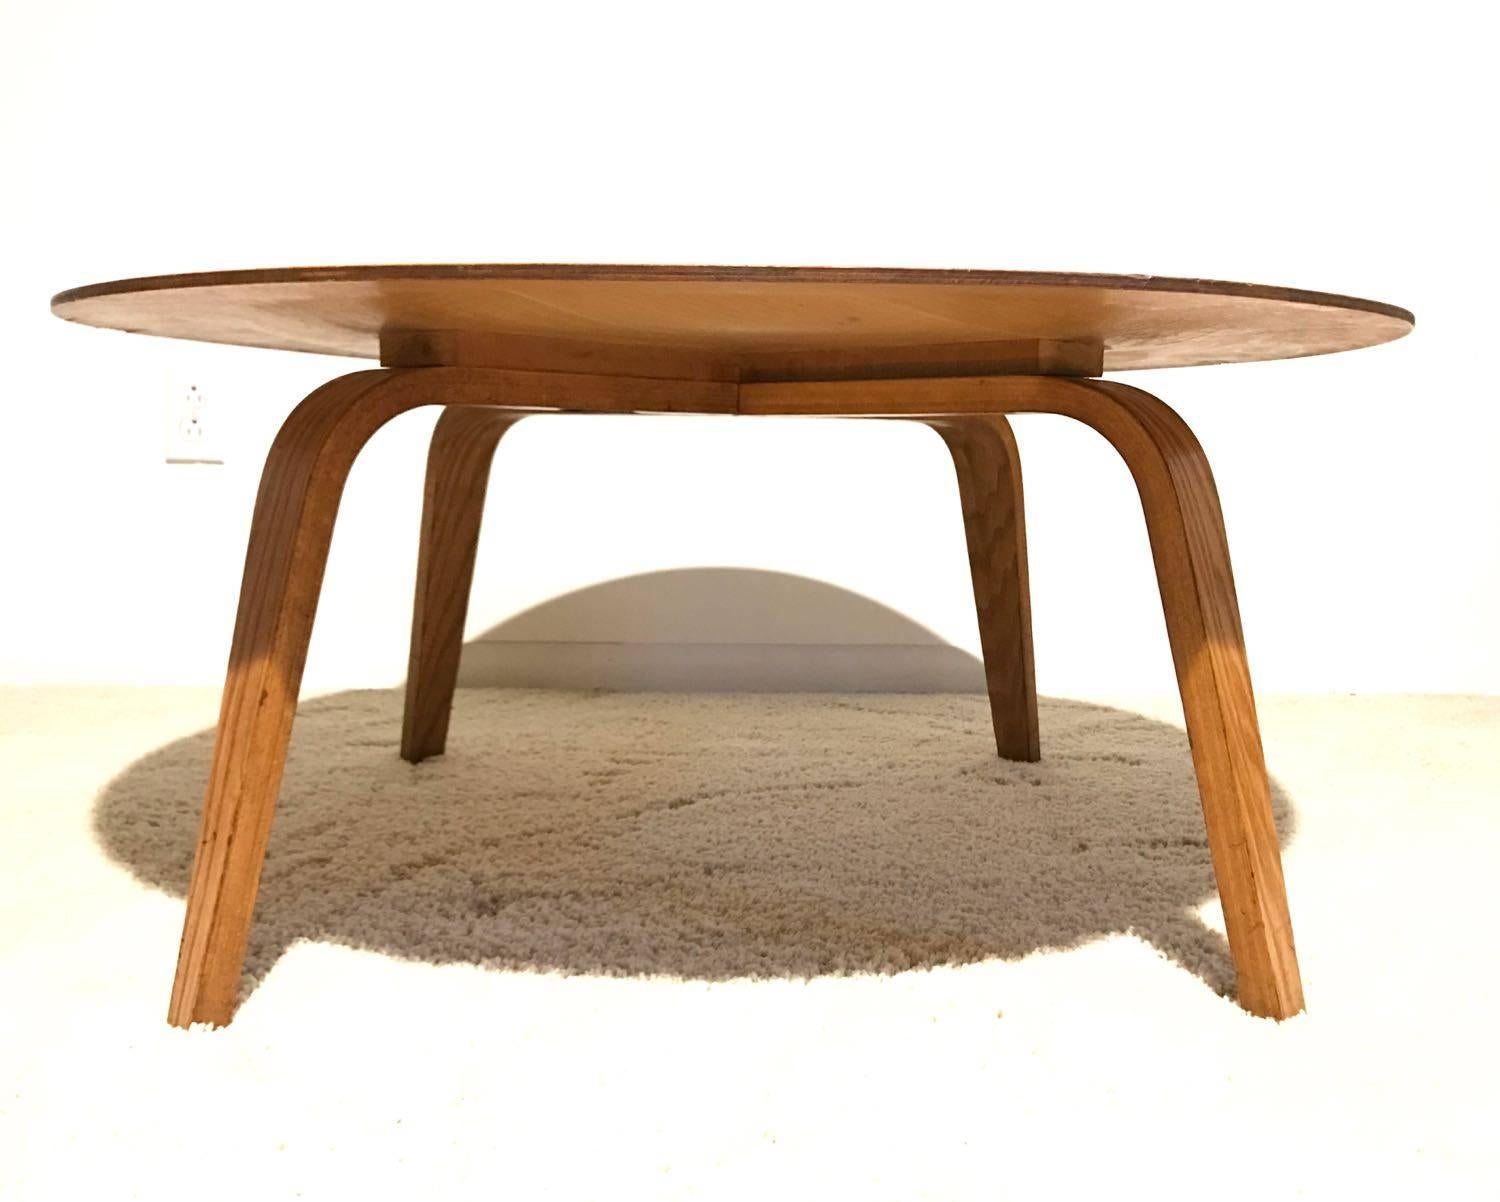 Designer: Charles Eames.
Period/style: Mid-Century Modern.
Country: United States. 
Manufacture: Evans. 
Date: 1940s.